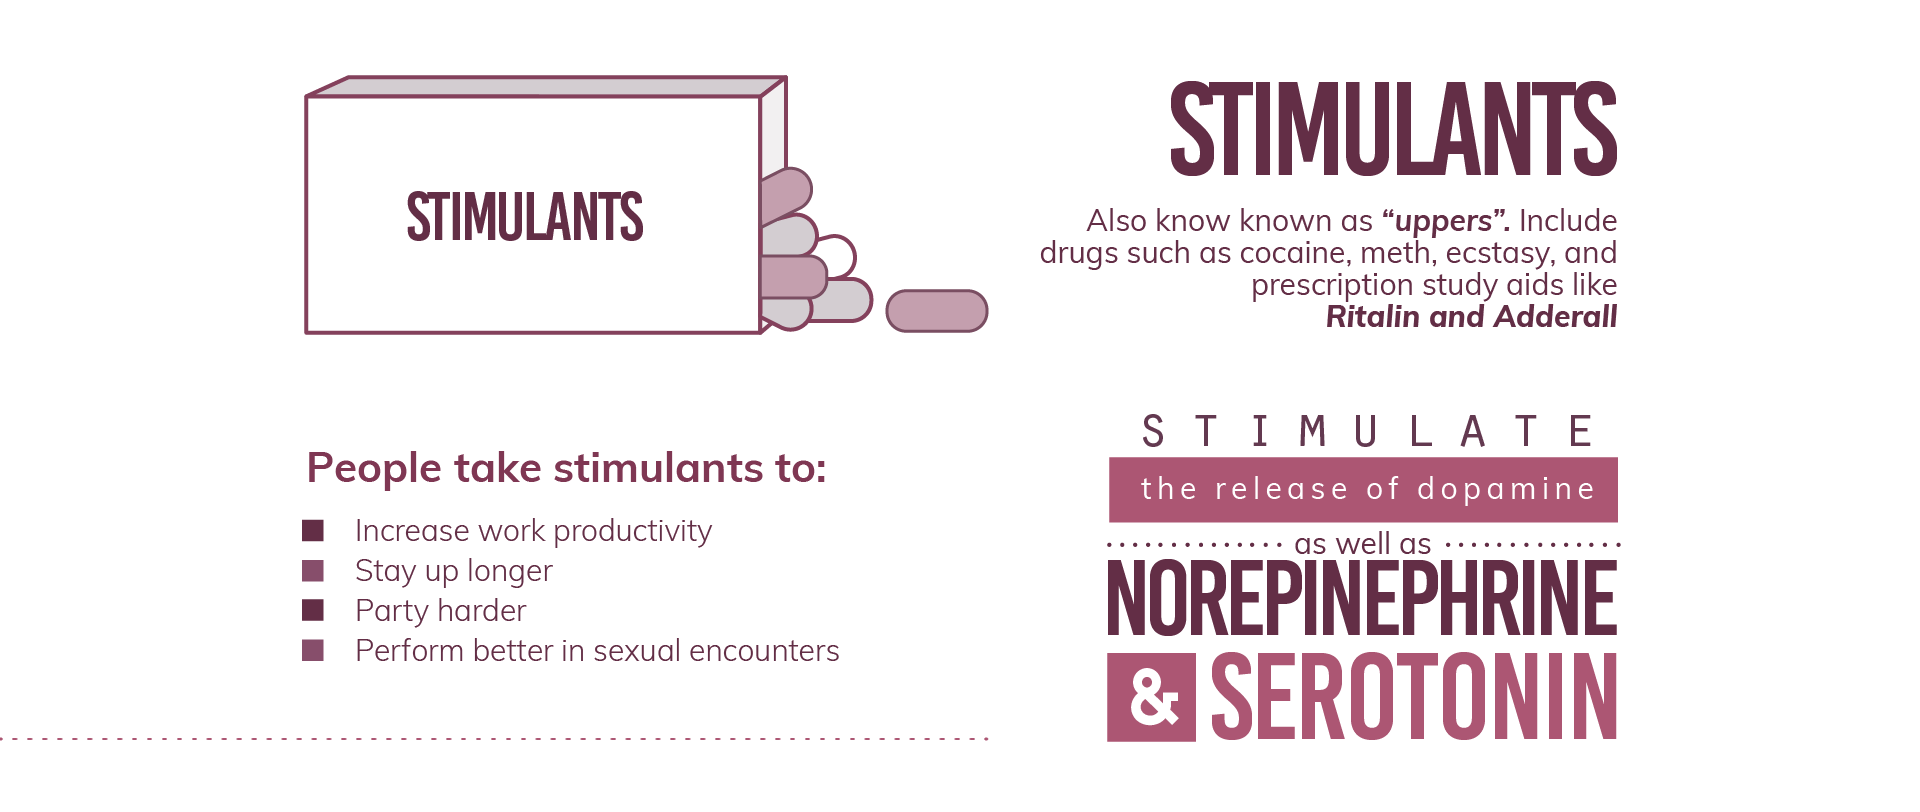 The Stimulants, also known known as "uppers" include drugs such as cocaine, meth, ectasy, and prescription study aids like ritalin and adderall. People take stimulants to increase work productivity, stay up longer, party harder, perform better in sexual encounters. the stimulants stimulate the release of dopamine as well as norepinephrine and serotonin